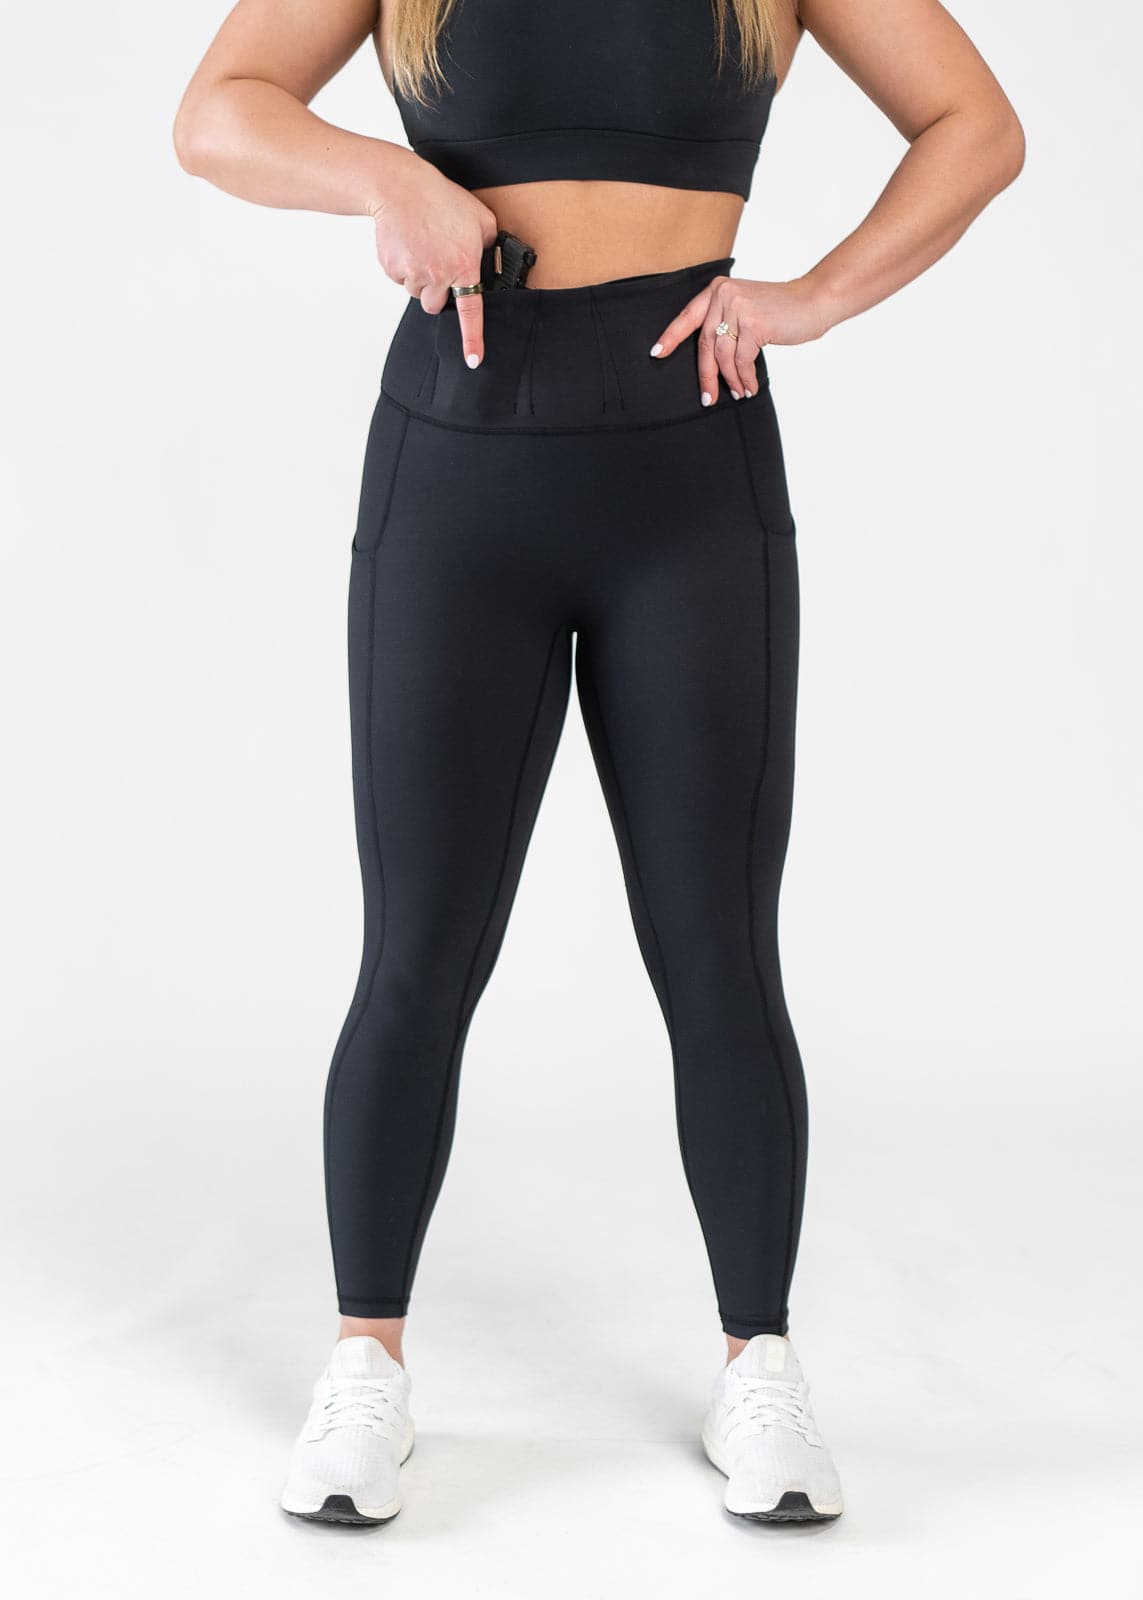 Concealed Carry Leggings With Pockets - Shoulders Down Front Back View Reaching for Concealed Carry | Black